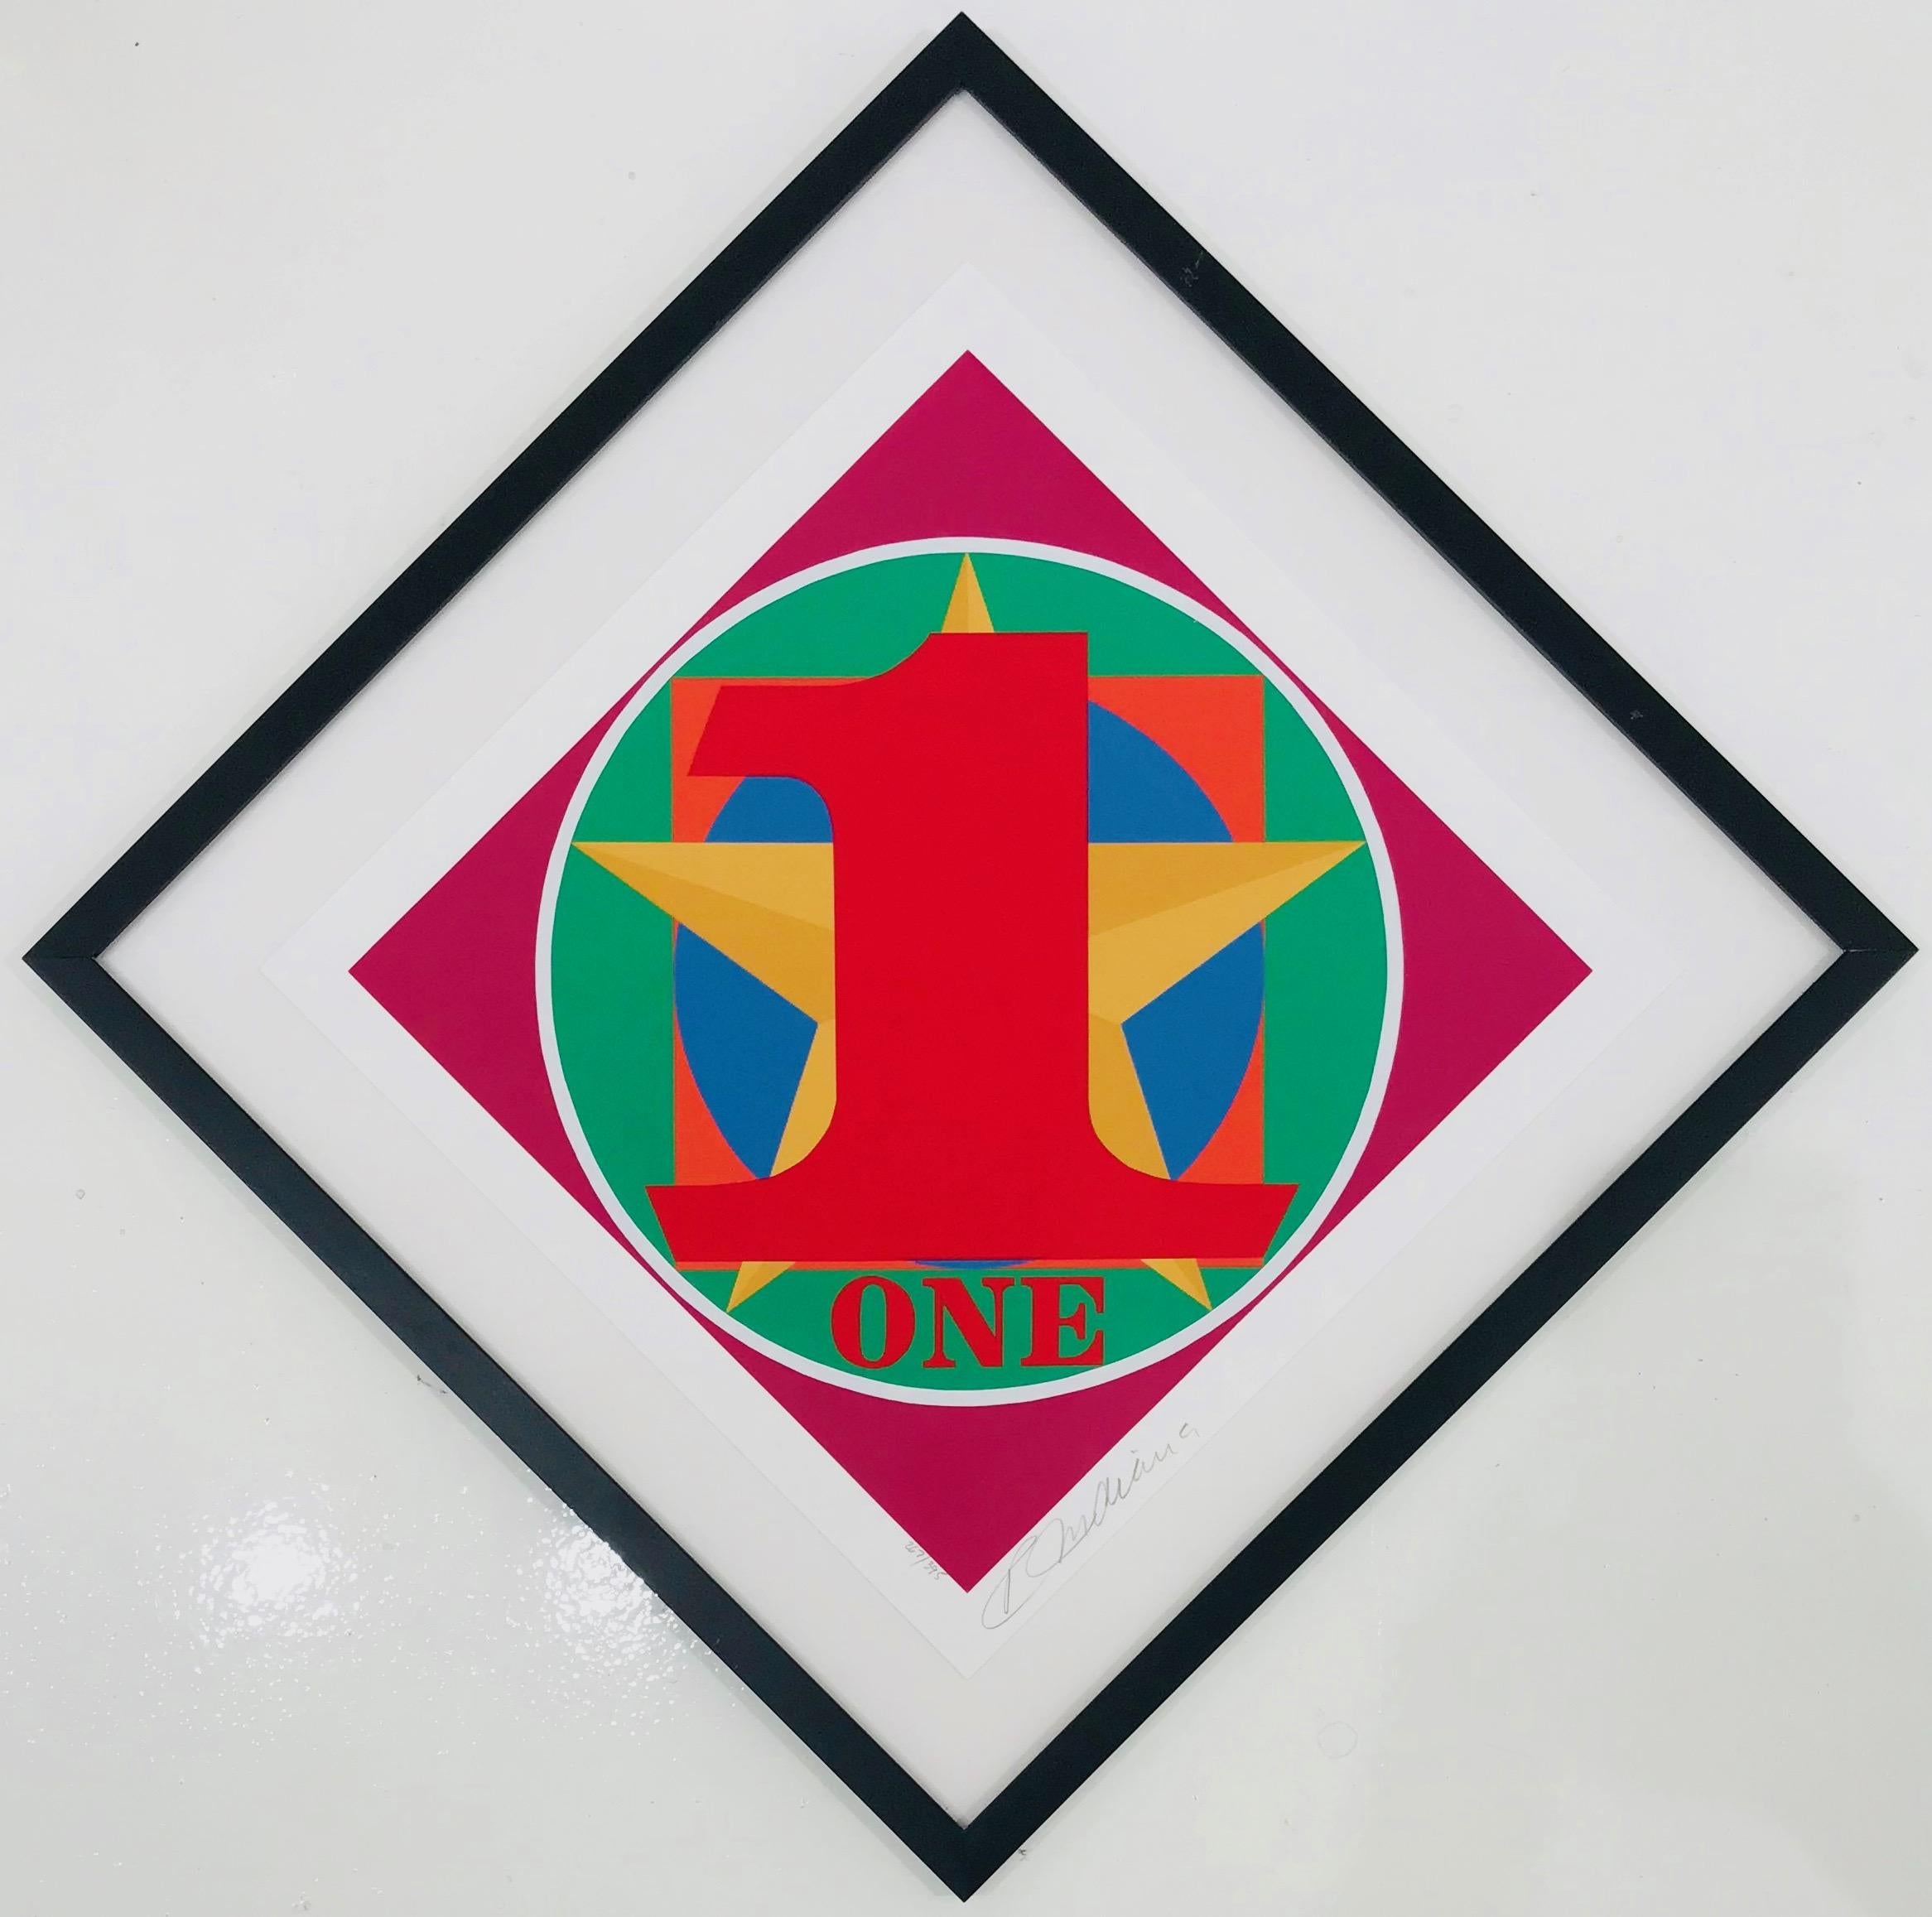 The American Dream  (One Indiana Square) - Print by Robert Indiana